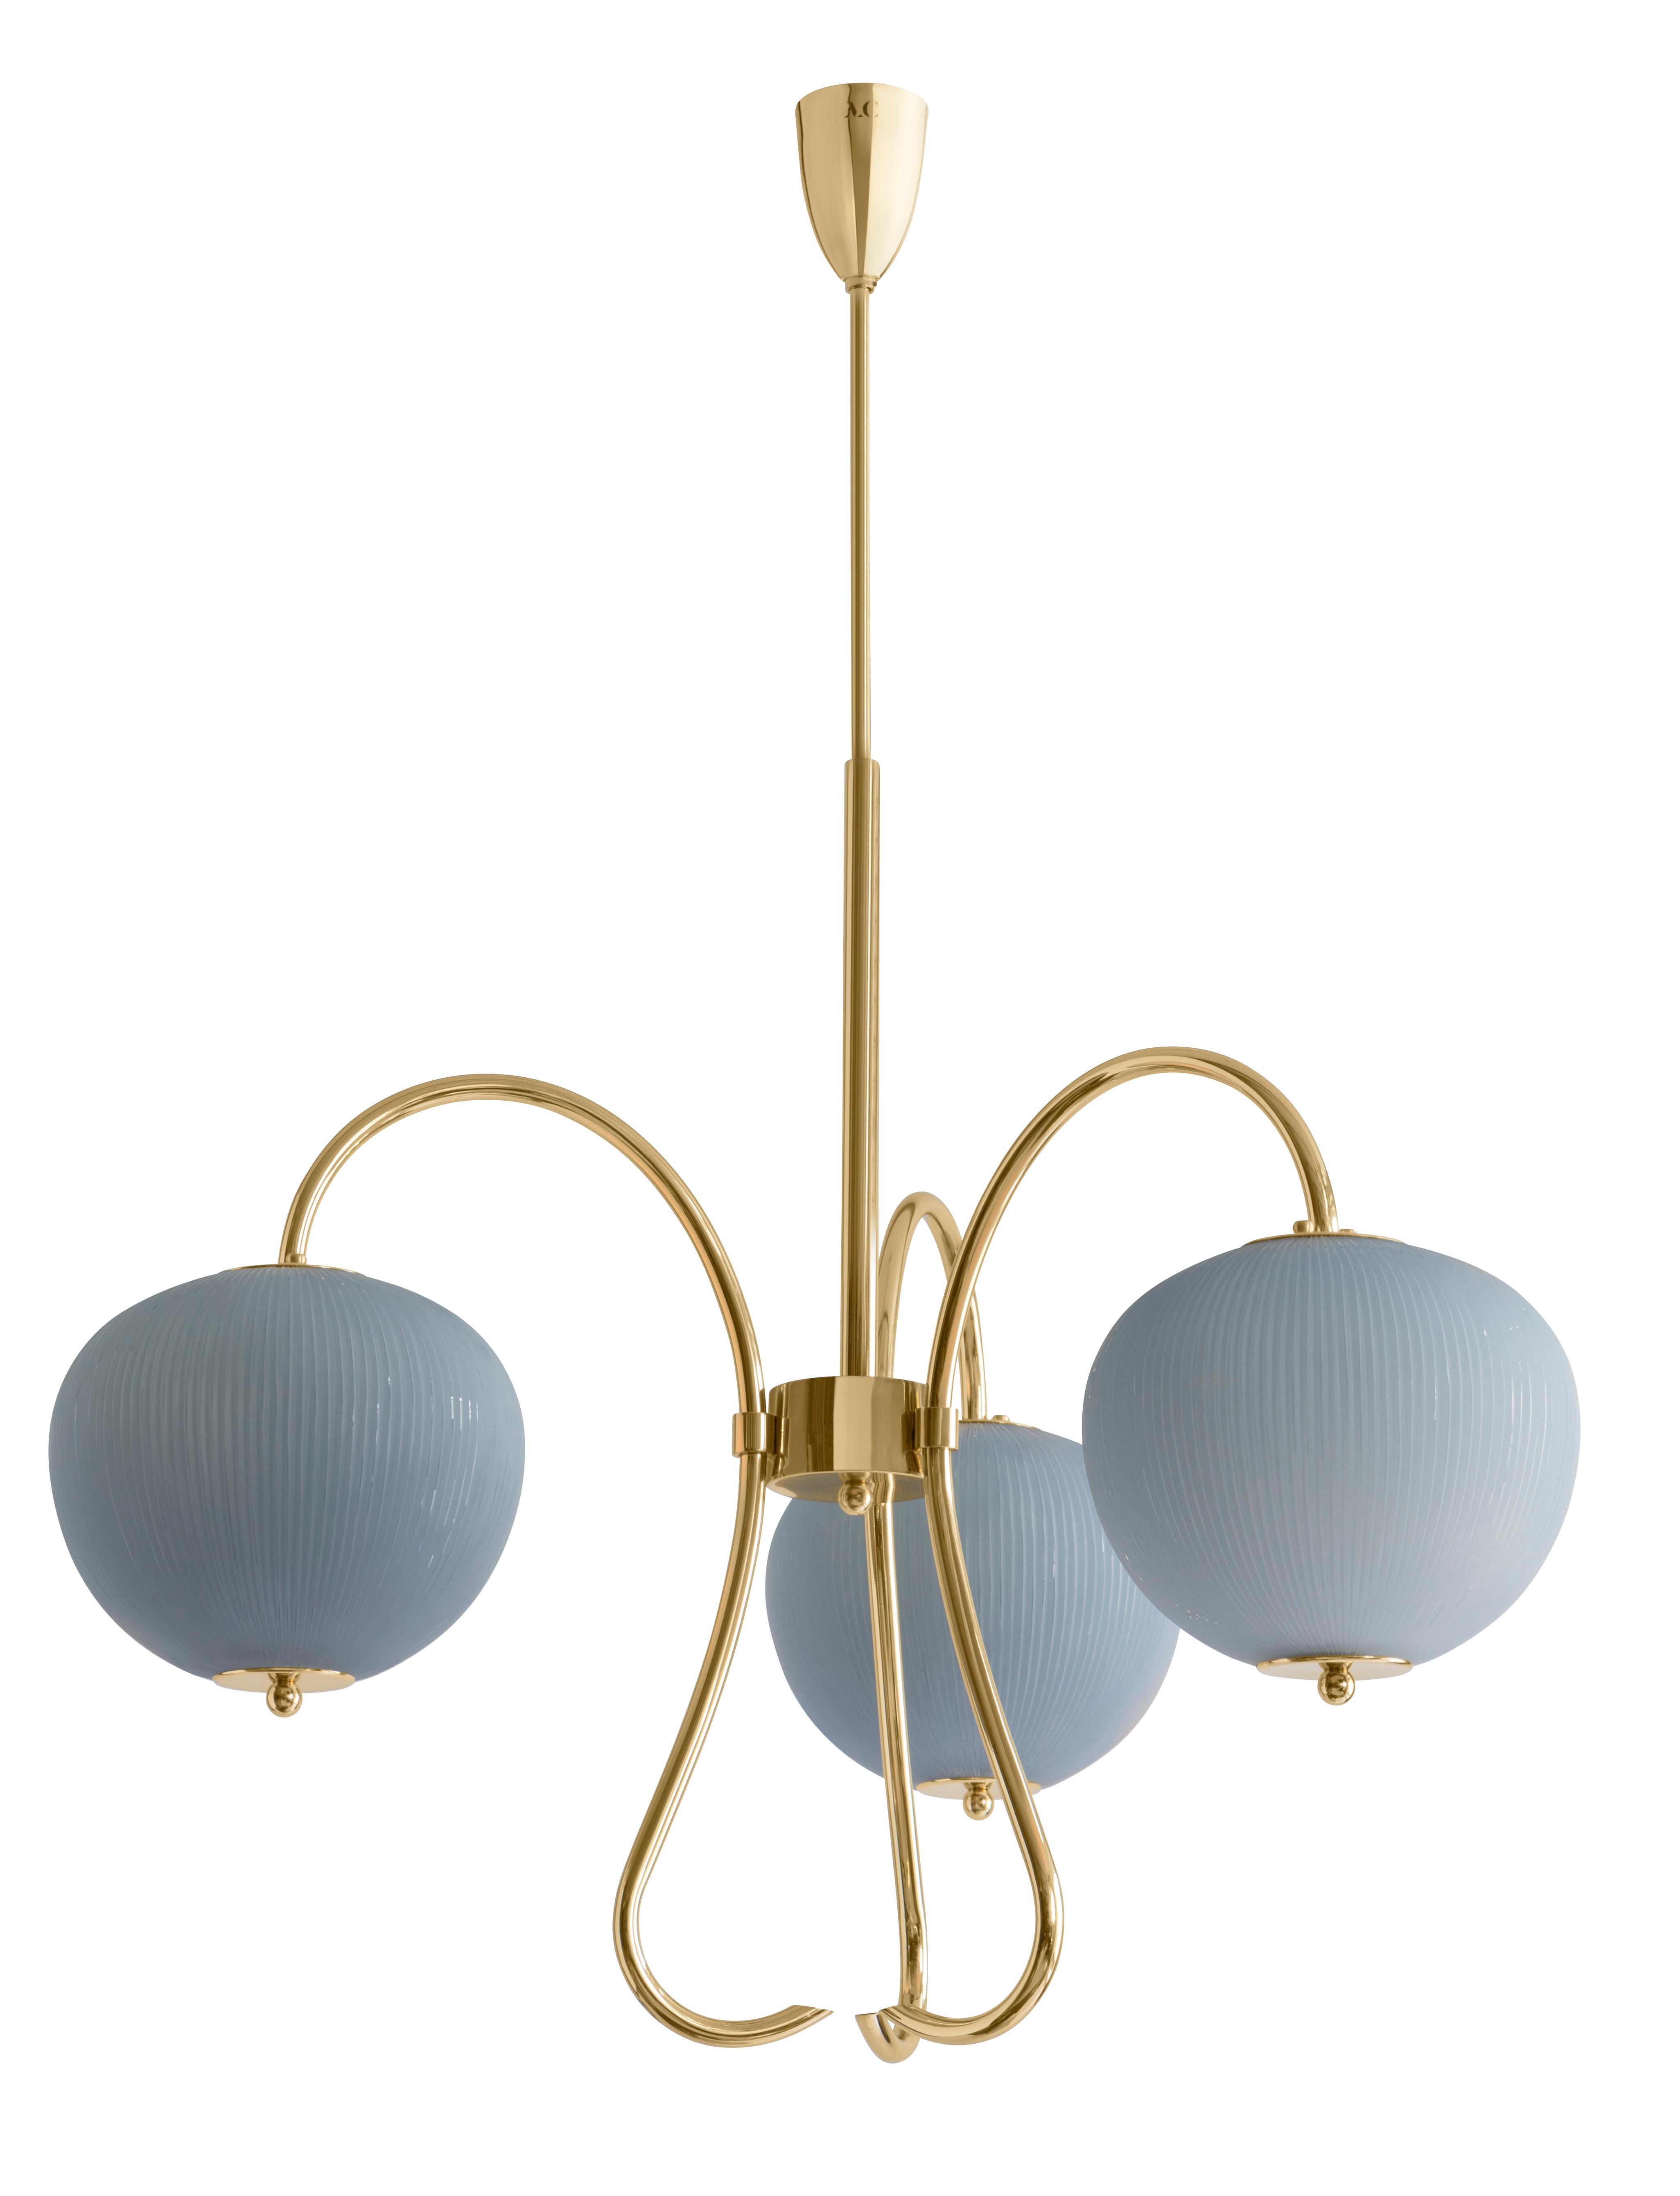 Triple chandelier China 03 by Magic Circus Editions
Dimensions: H 120 x W 81.5 x D 26.2 cm
Materials: Brass, mouth blown glass sculpted with a diamond saw
Colour: opal grey

Available finishes: Brass, nickel
Available colours: enamel soft